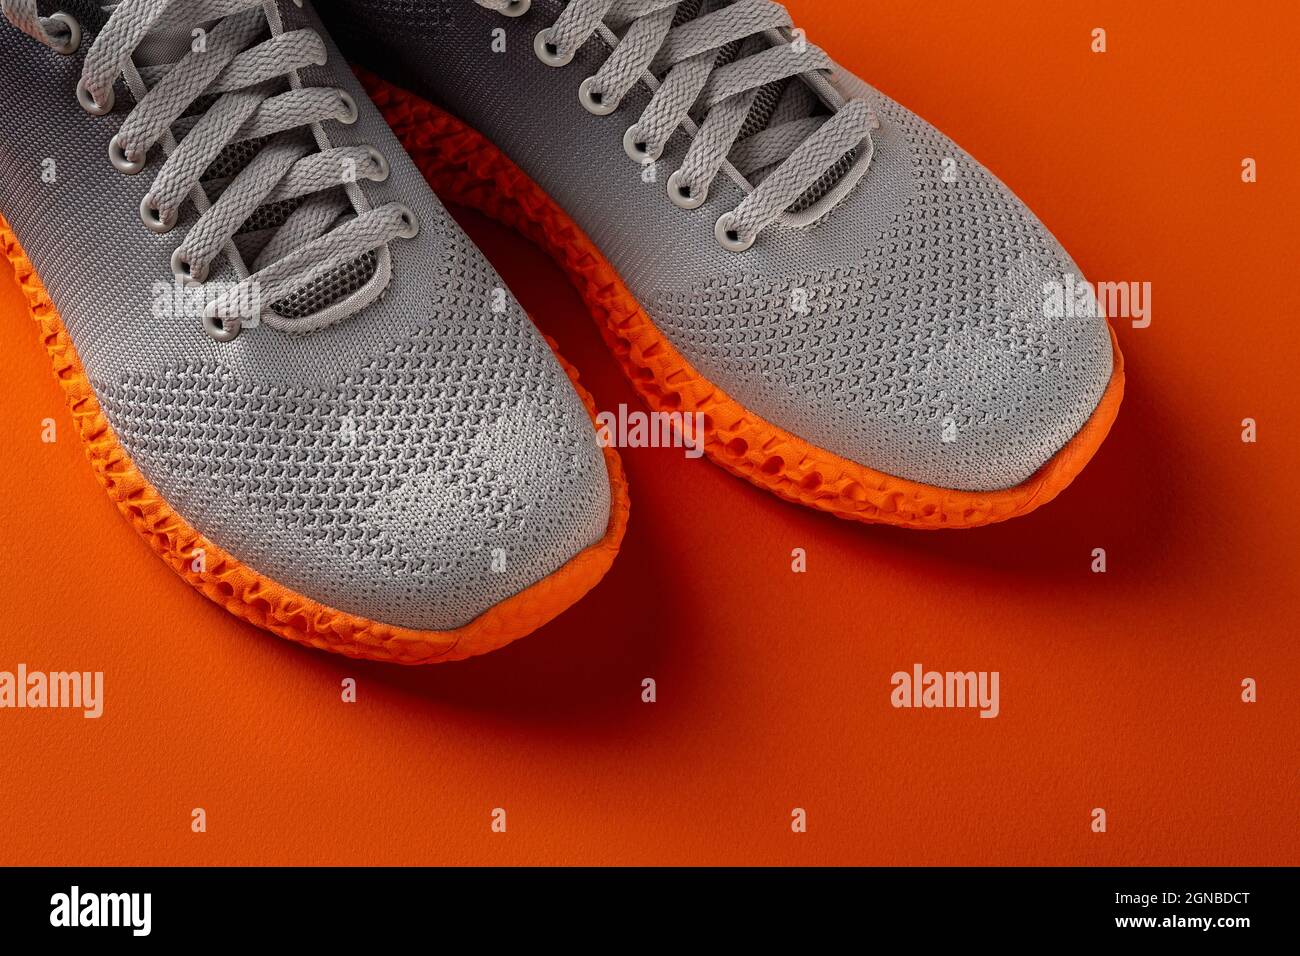 Pair of grooved orange sole sneakers from gray mesh fabric over orange background. Laced up stylish  textile trainers for active lifestyle, fitness. Stock Photo